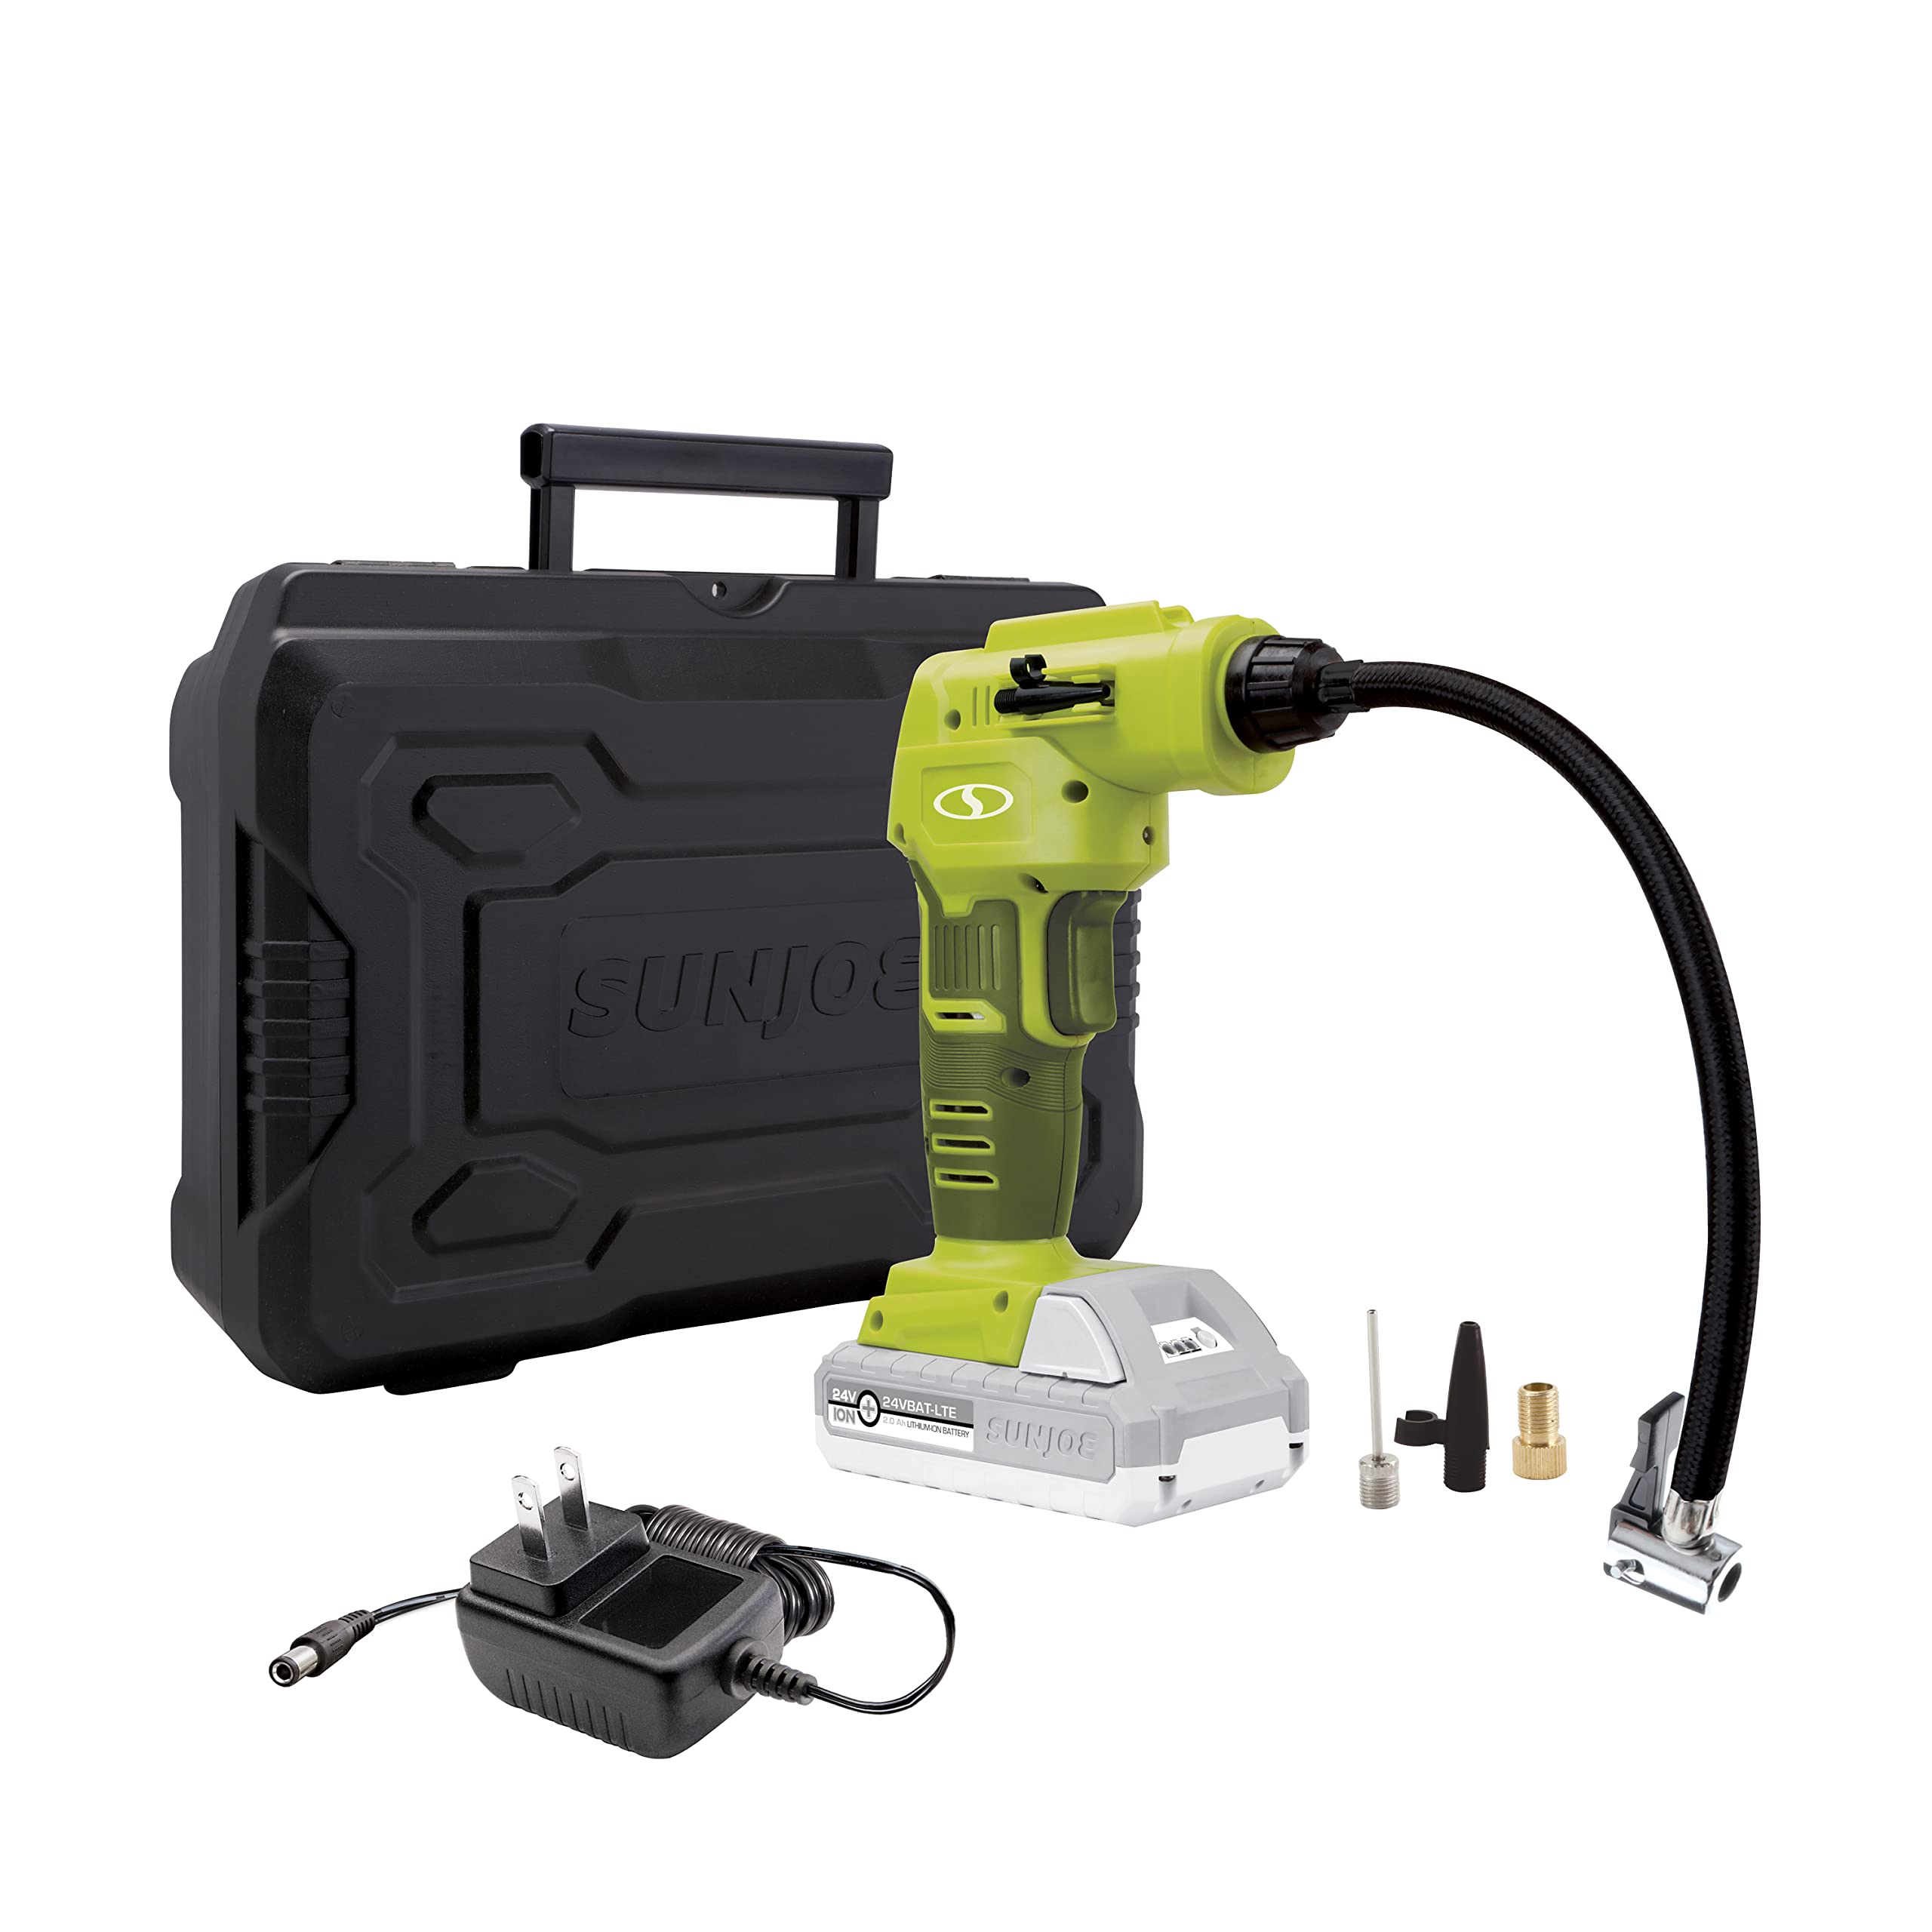 Auto Joe 24V-AJC1-LTE-P1 24-Volt IONMAX Cordless Portable Air Compressor Kit, w/ 2.0-Ah Battery, Charger, Storage Bag, and Nozzle Adapters & 24V-DD-CT Cordless 24-Position 2-Speed Drill Driver, Tool